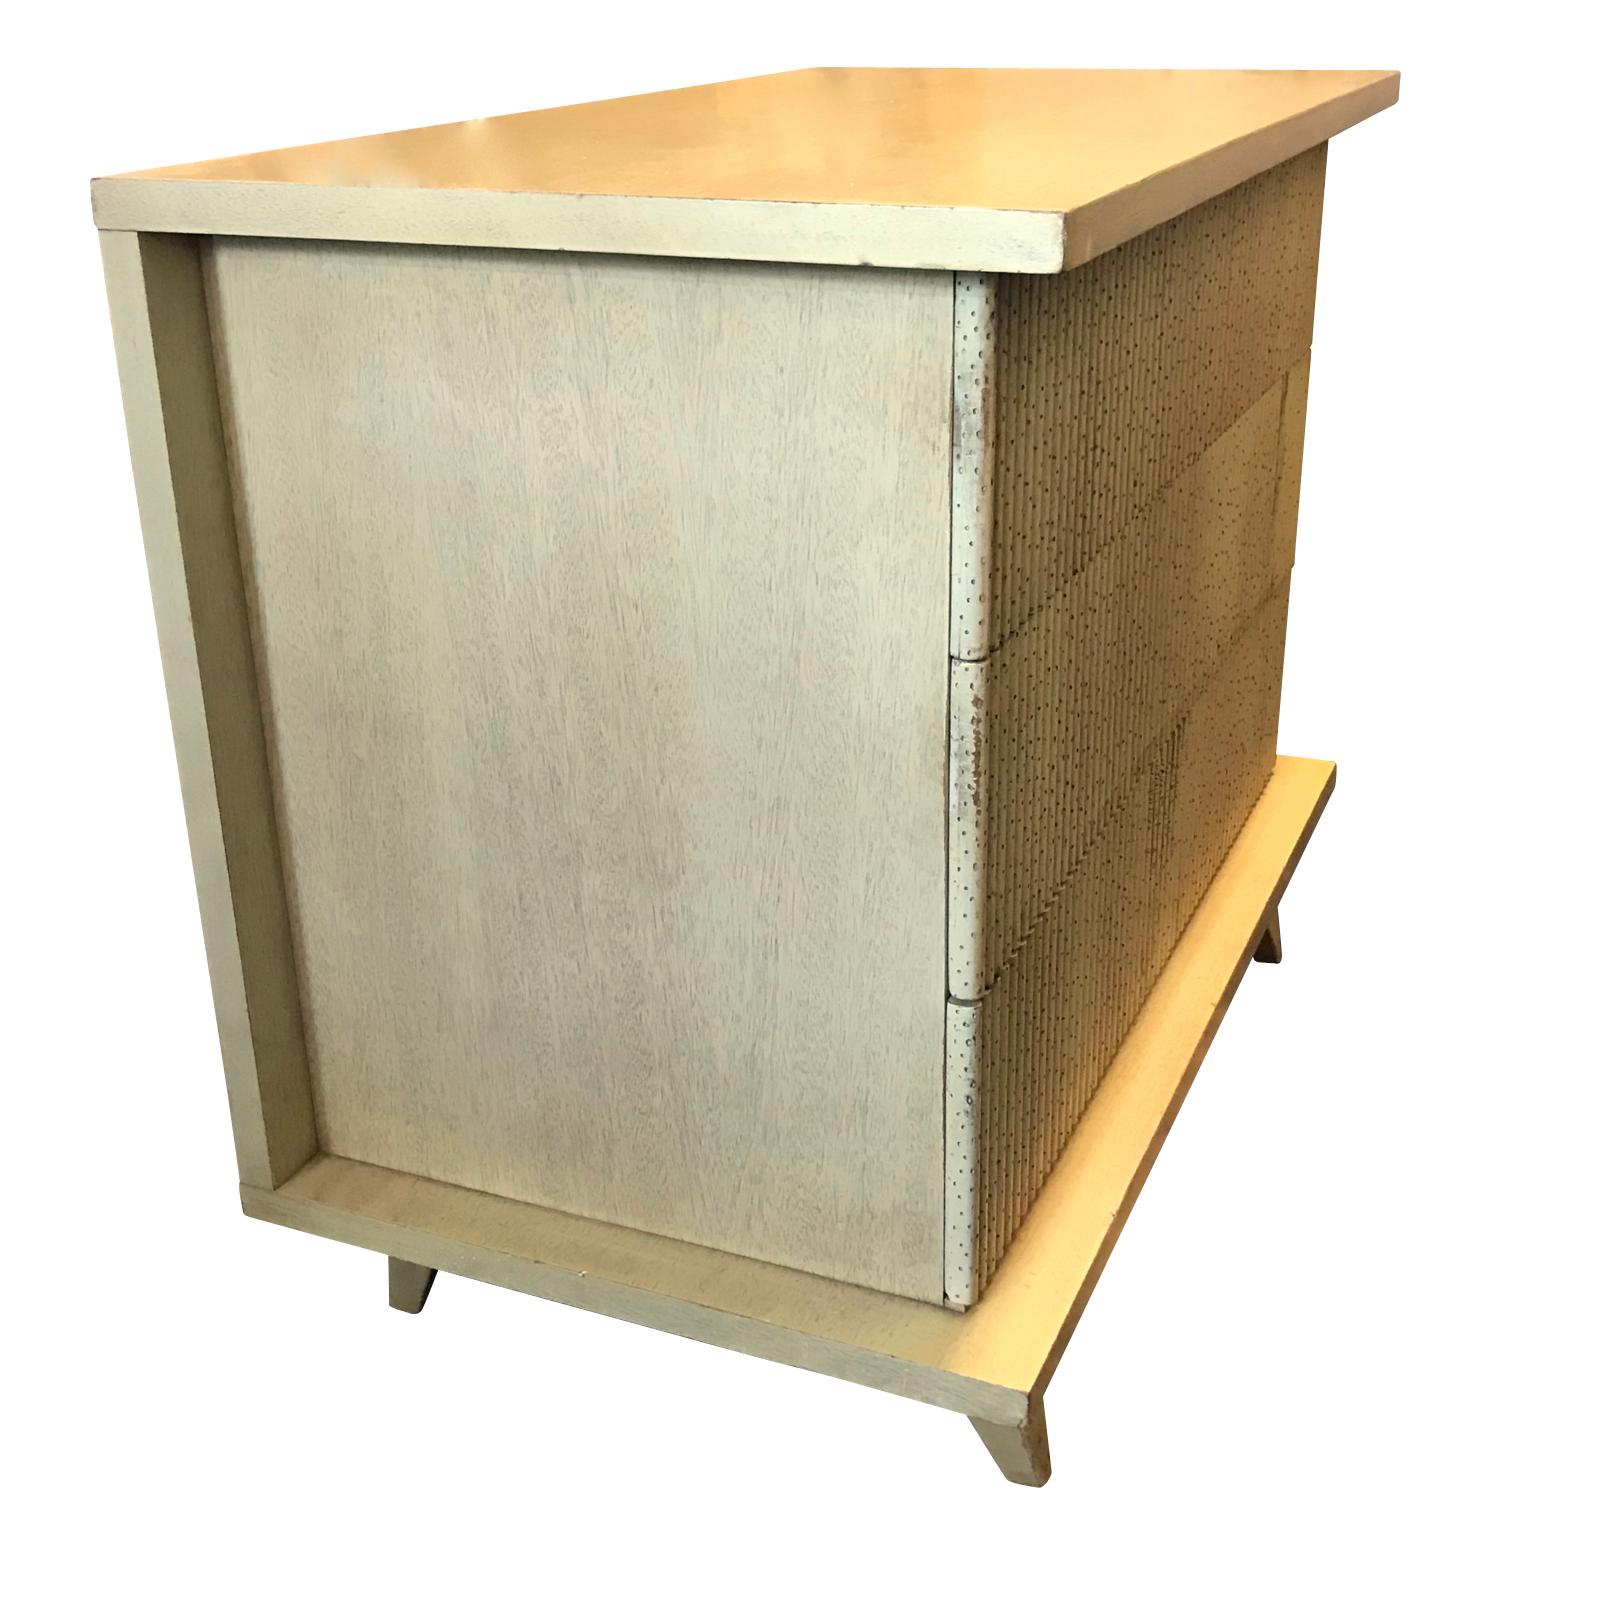 Pair midcentury textured rib front three-drawer commodes.
Clean front, hardware free.
Smooth recessed sides.
Tapered legs.
Sycamore.